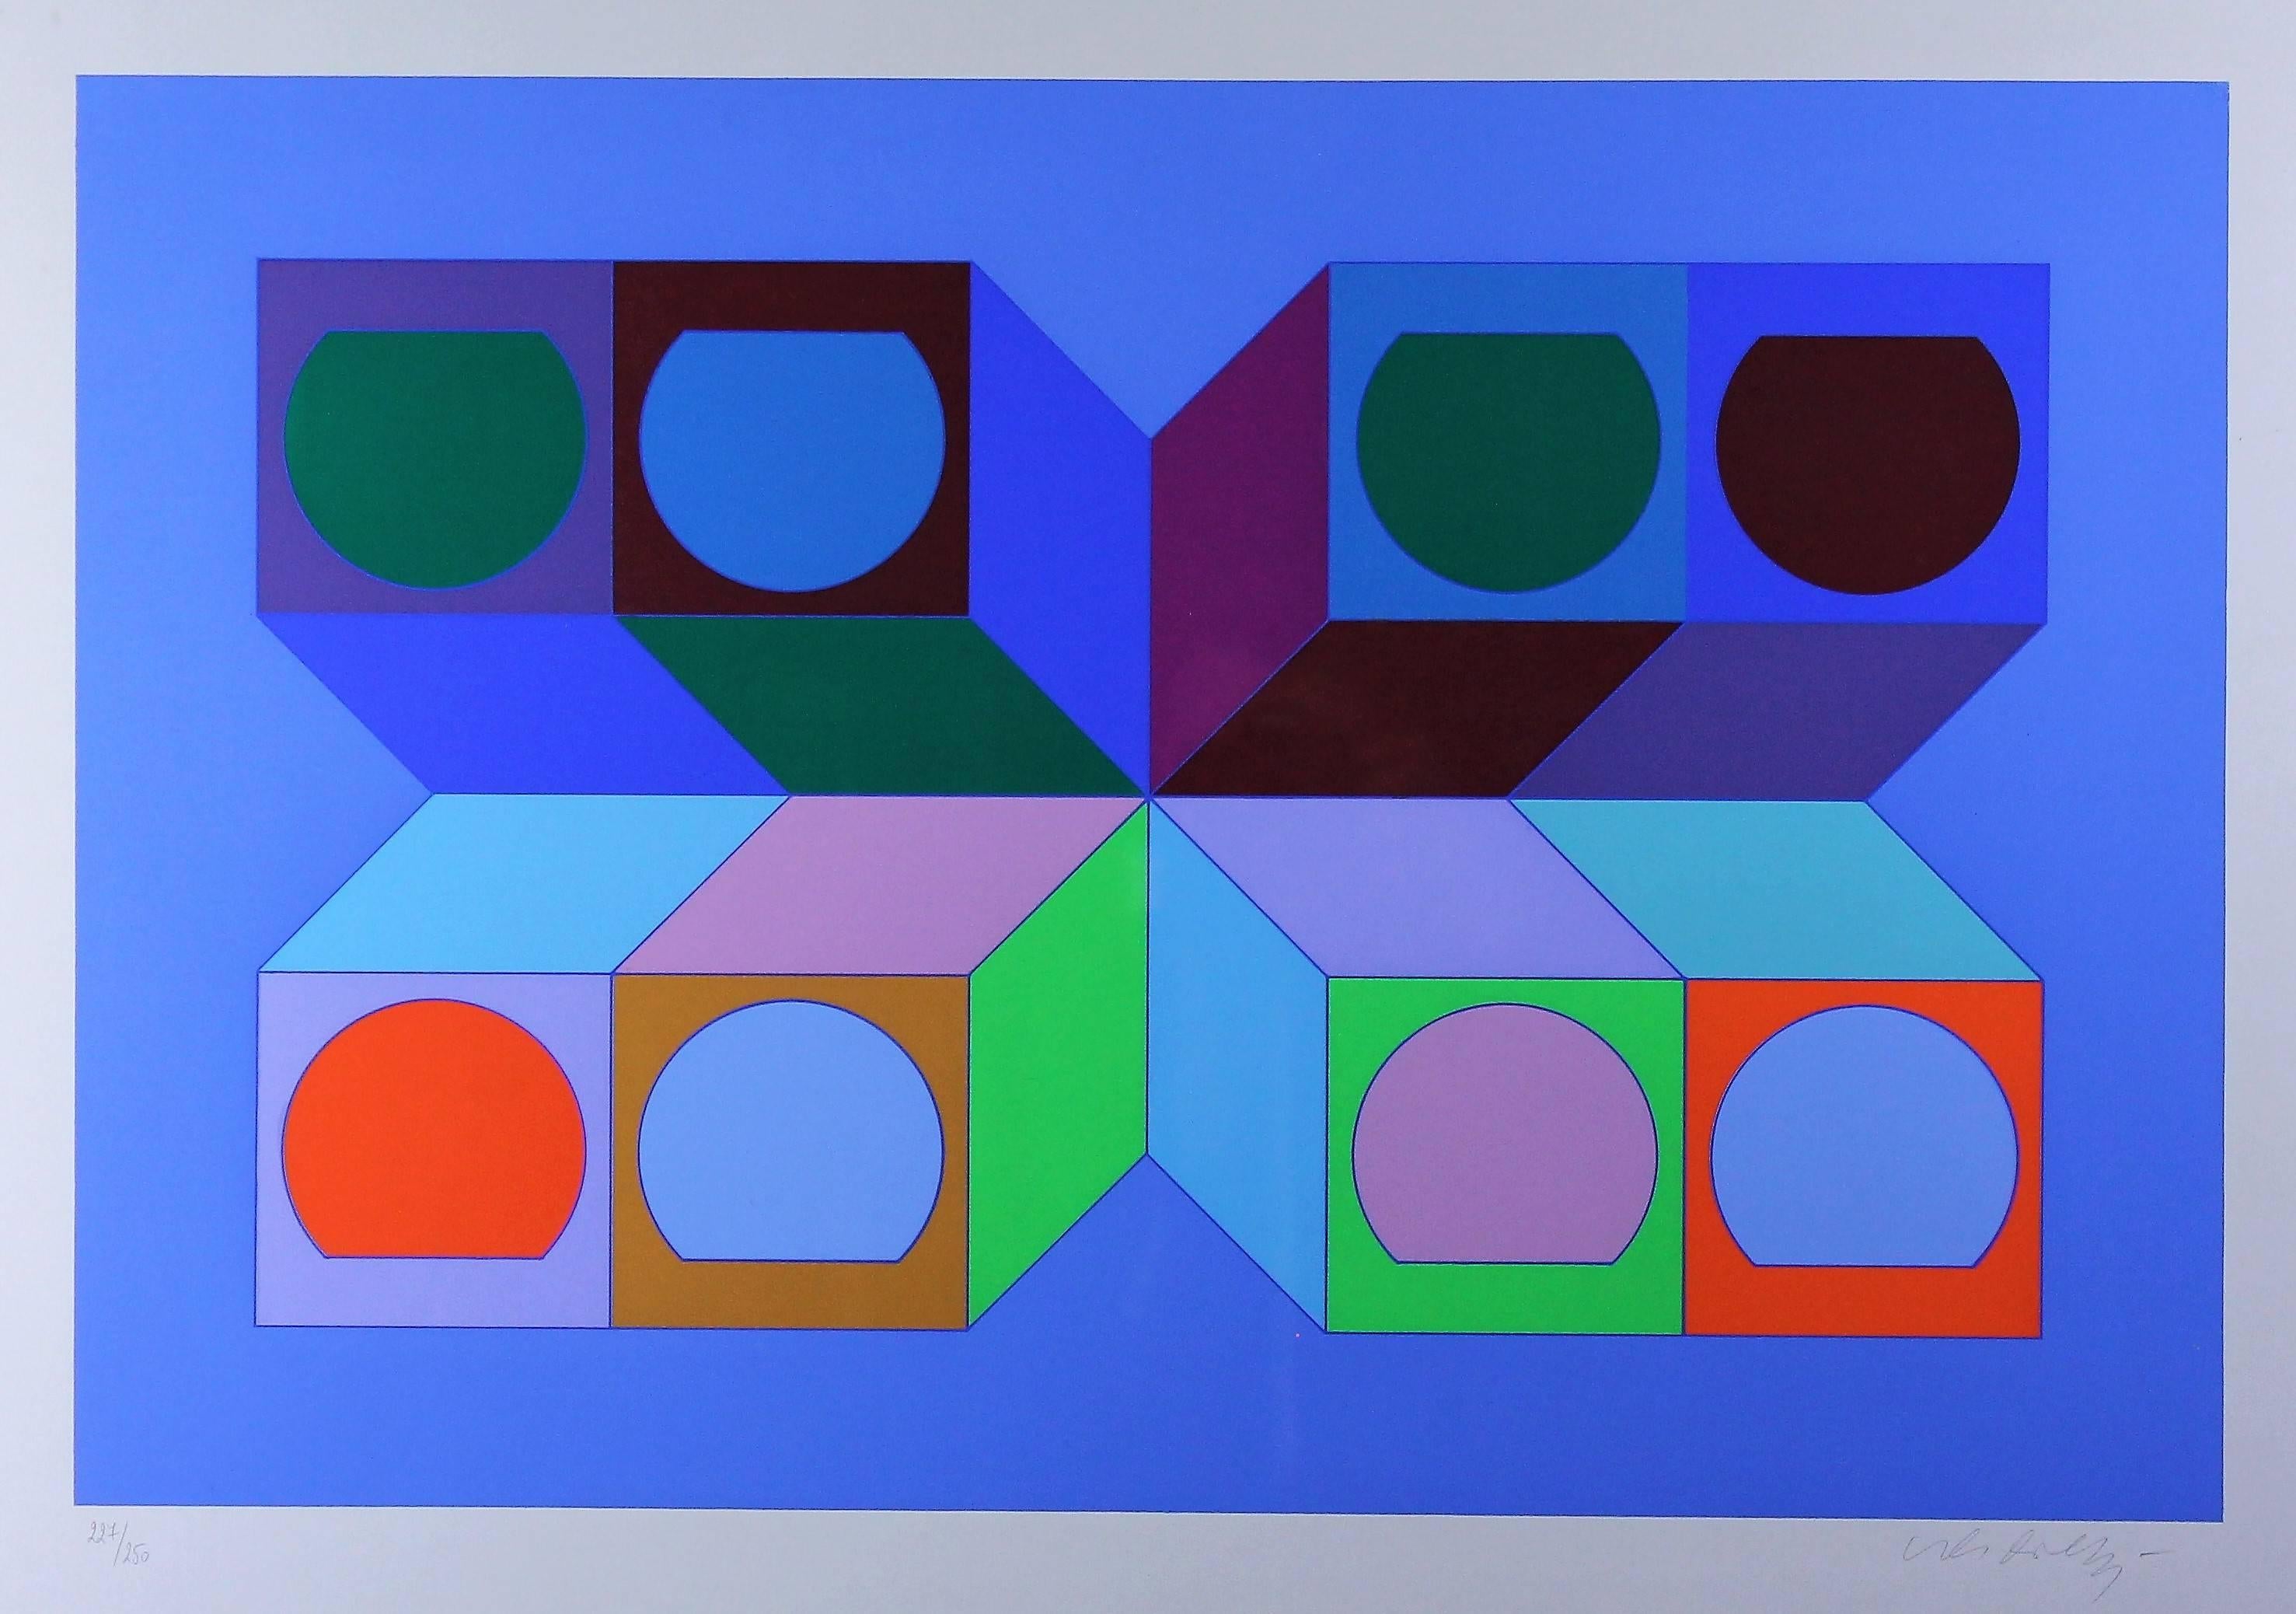 Modern Vasarely Victor, Serie Cube Serigraphy 1974, Signed and Numbered